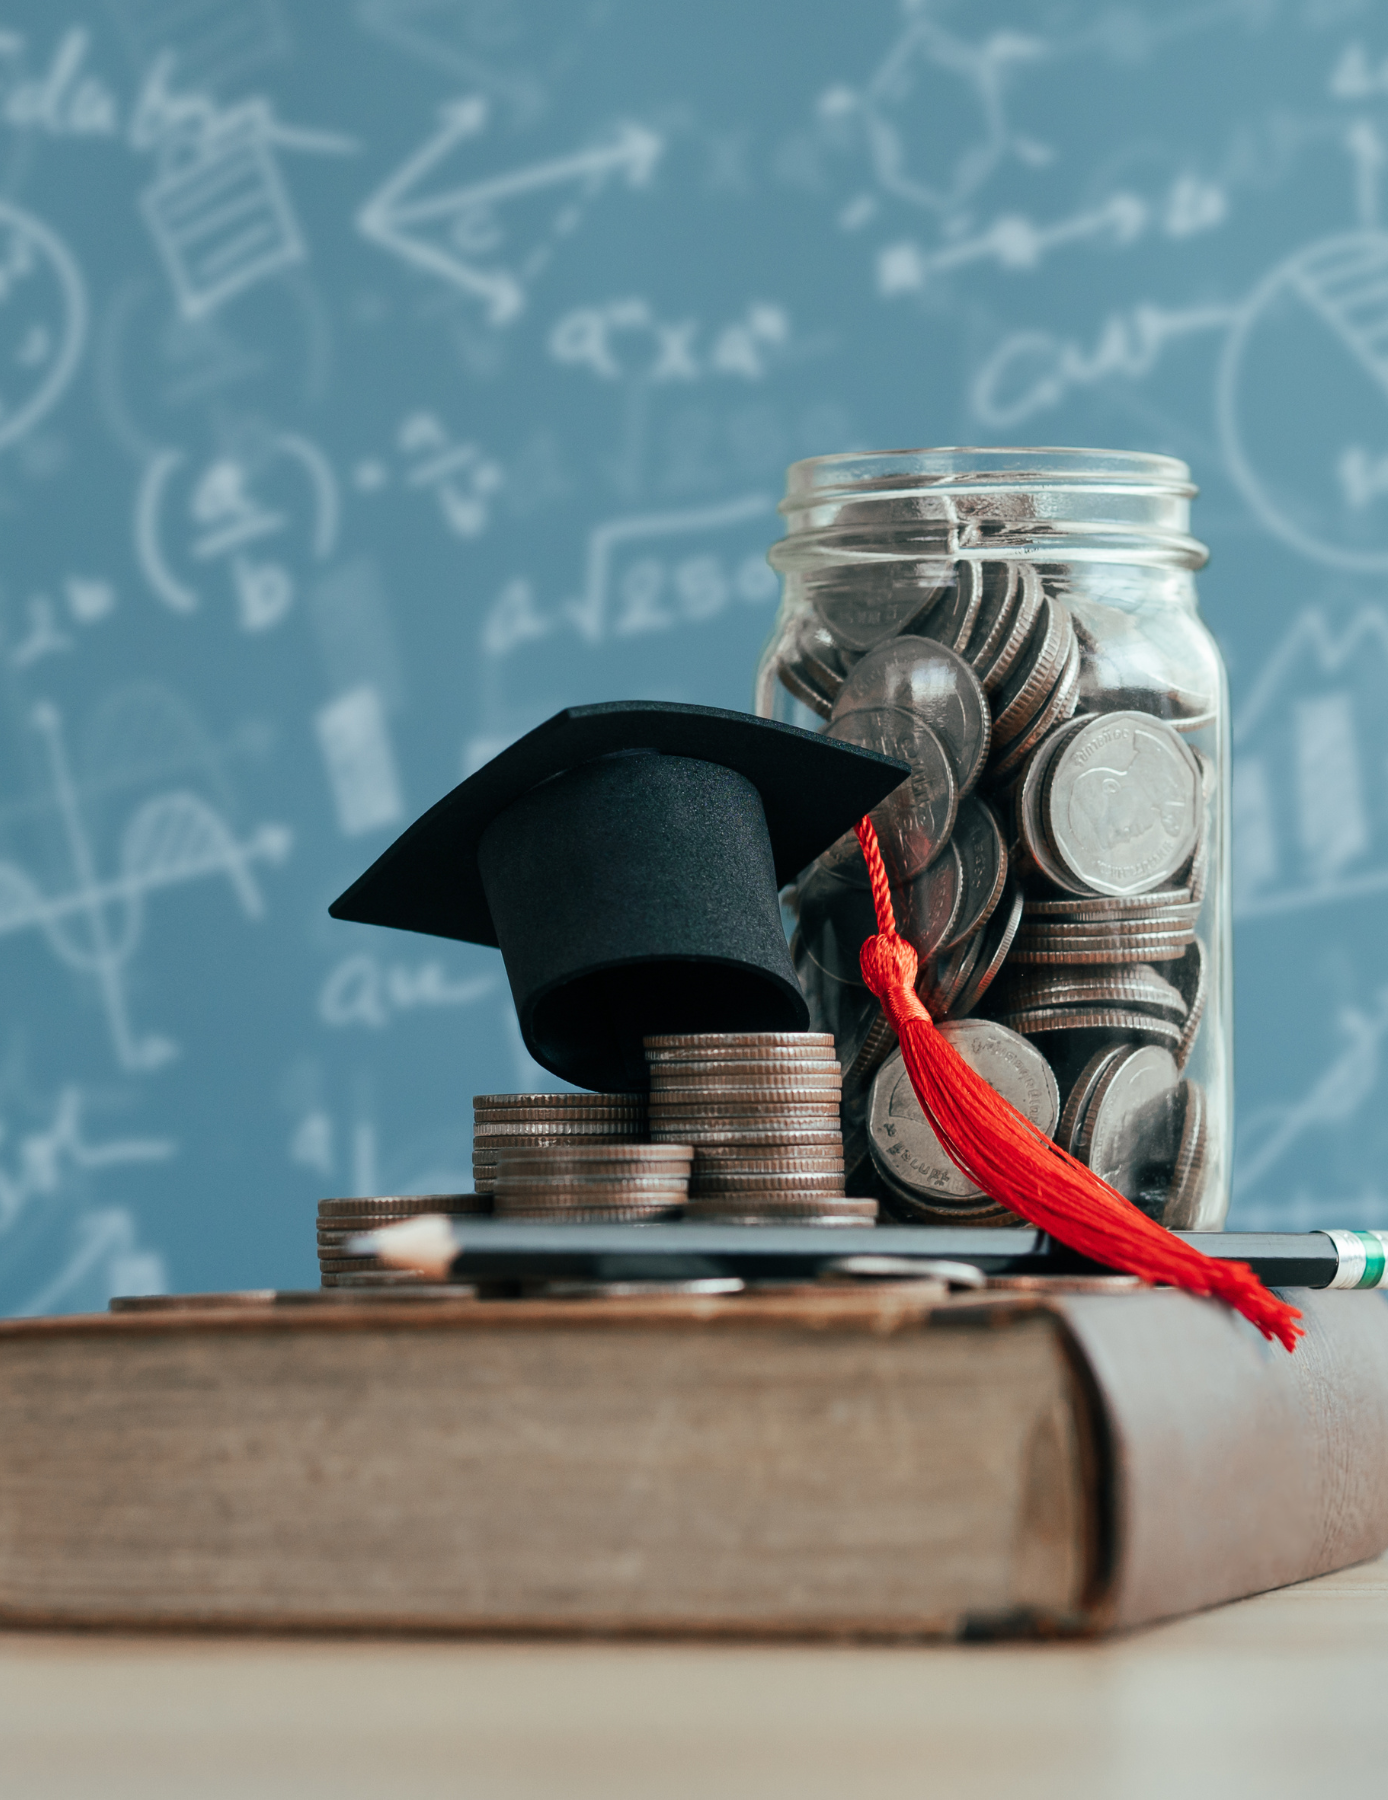 Measuring ROI in Higher Education